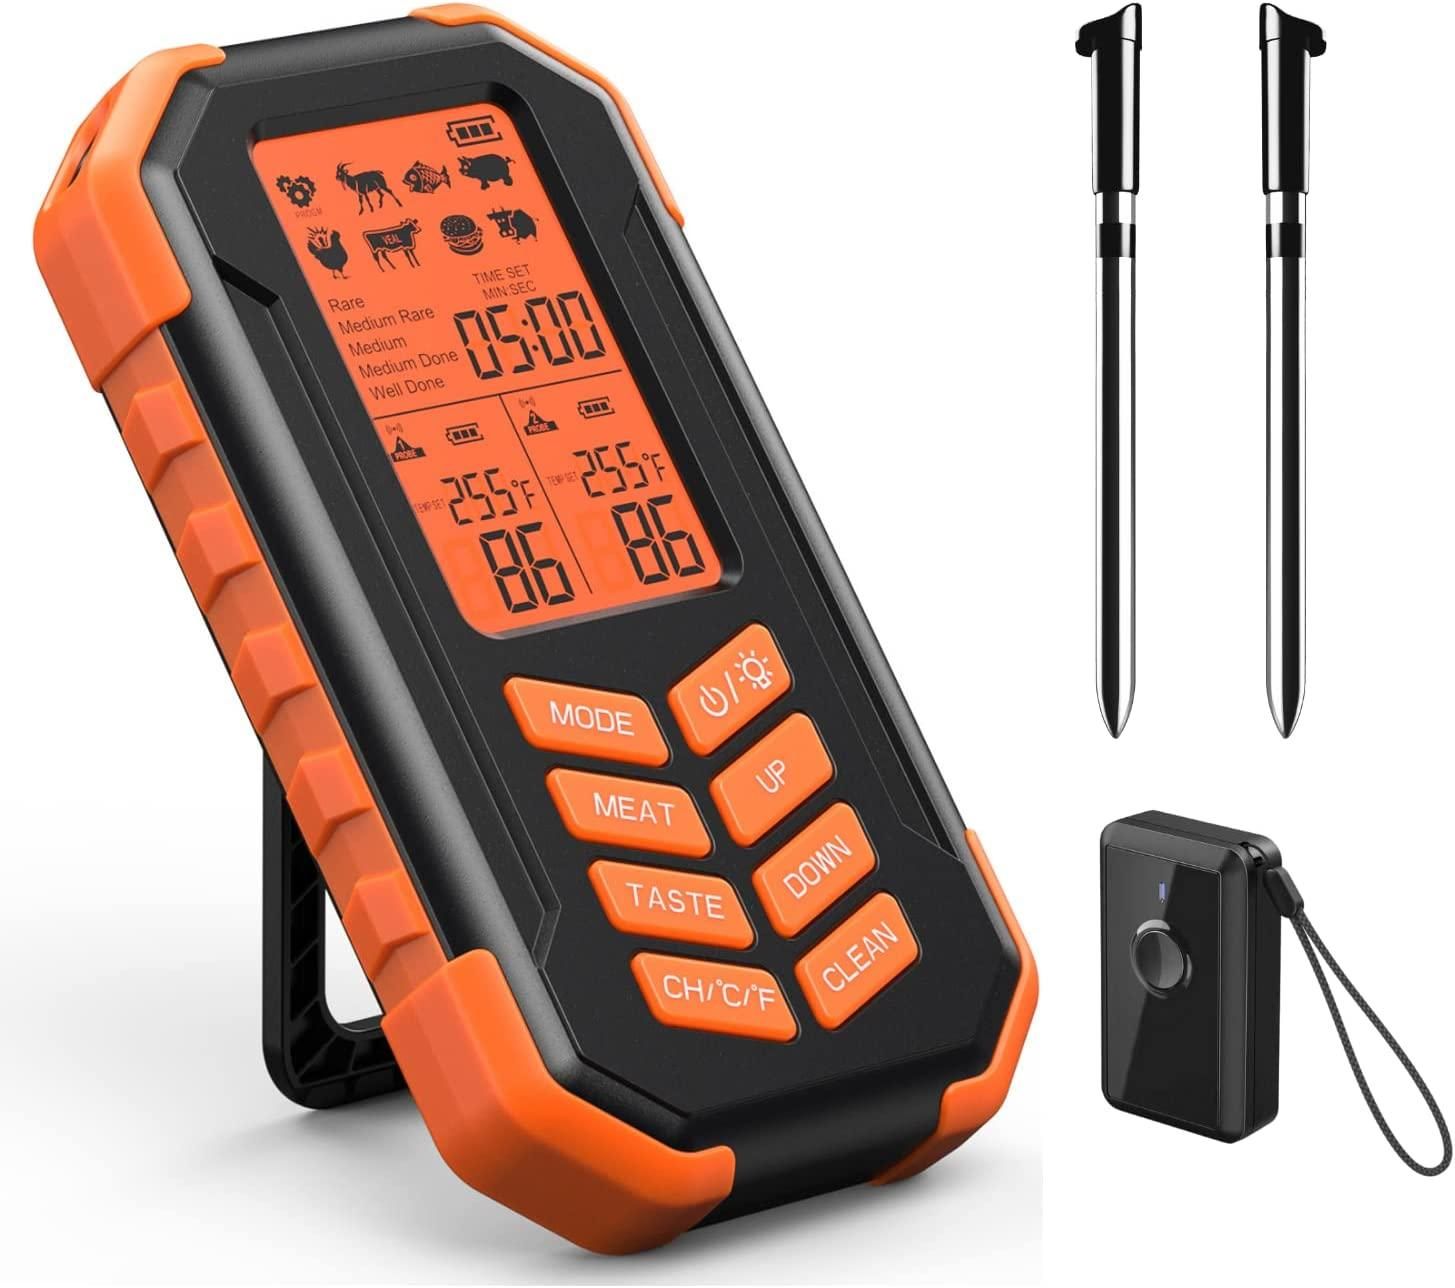 Save 50% on Govee's 4-probe Wi-Fi Meat Thermometer at new